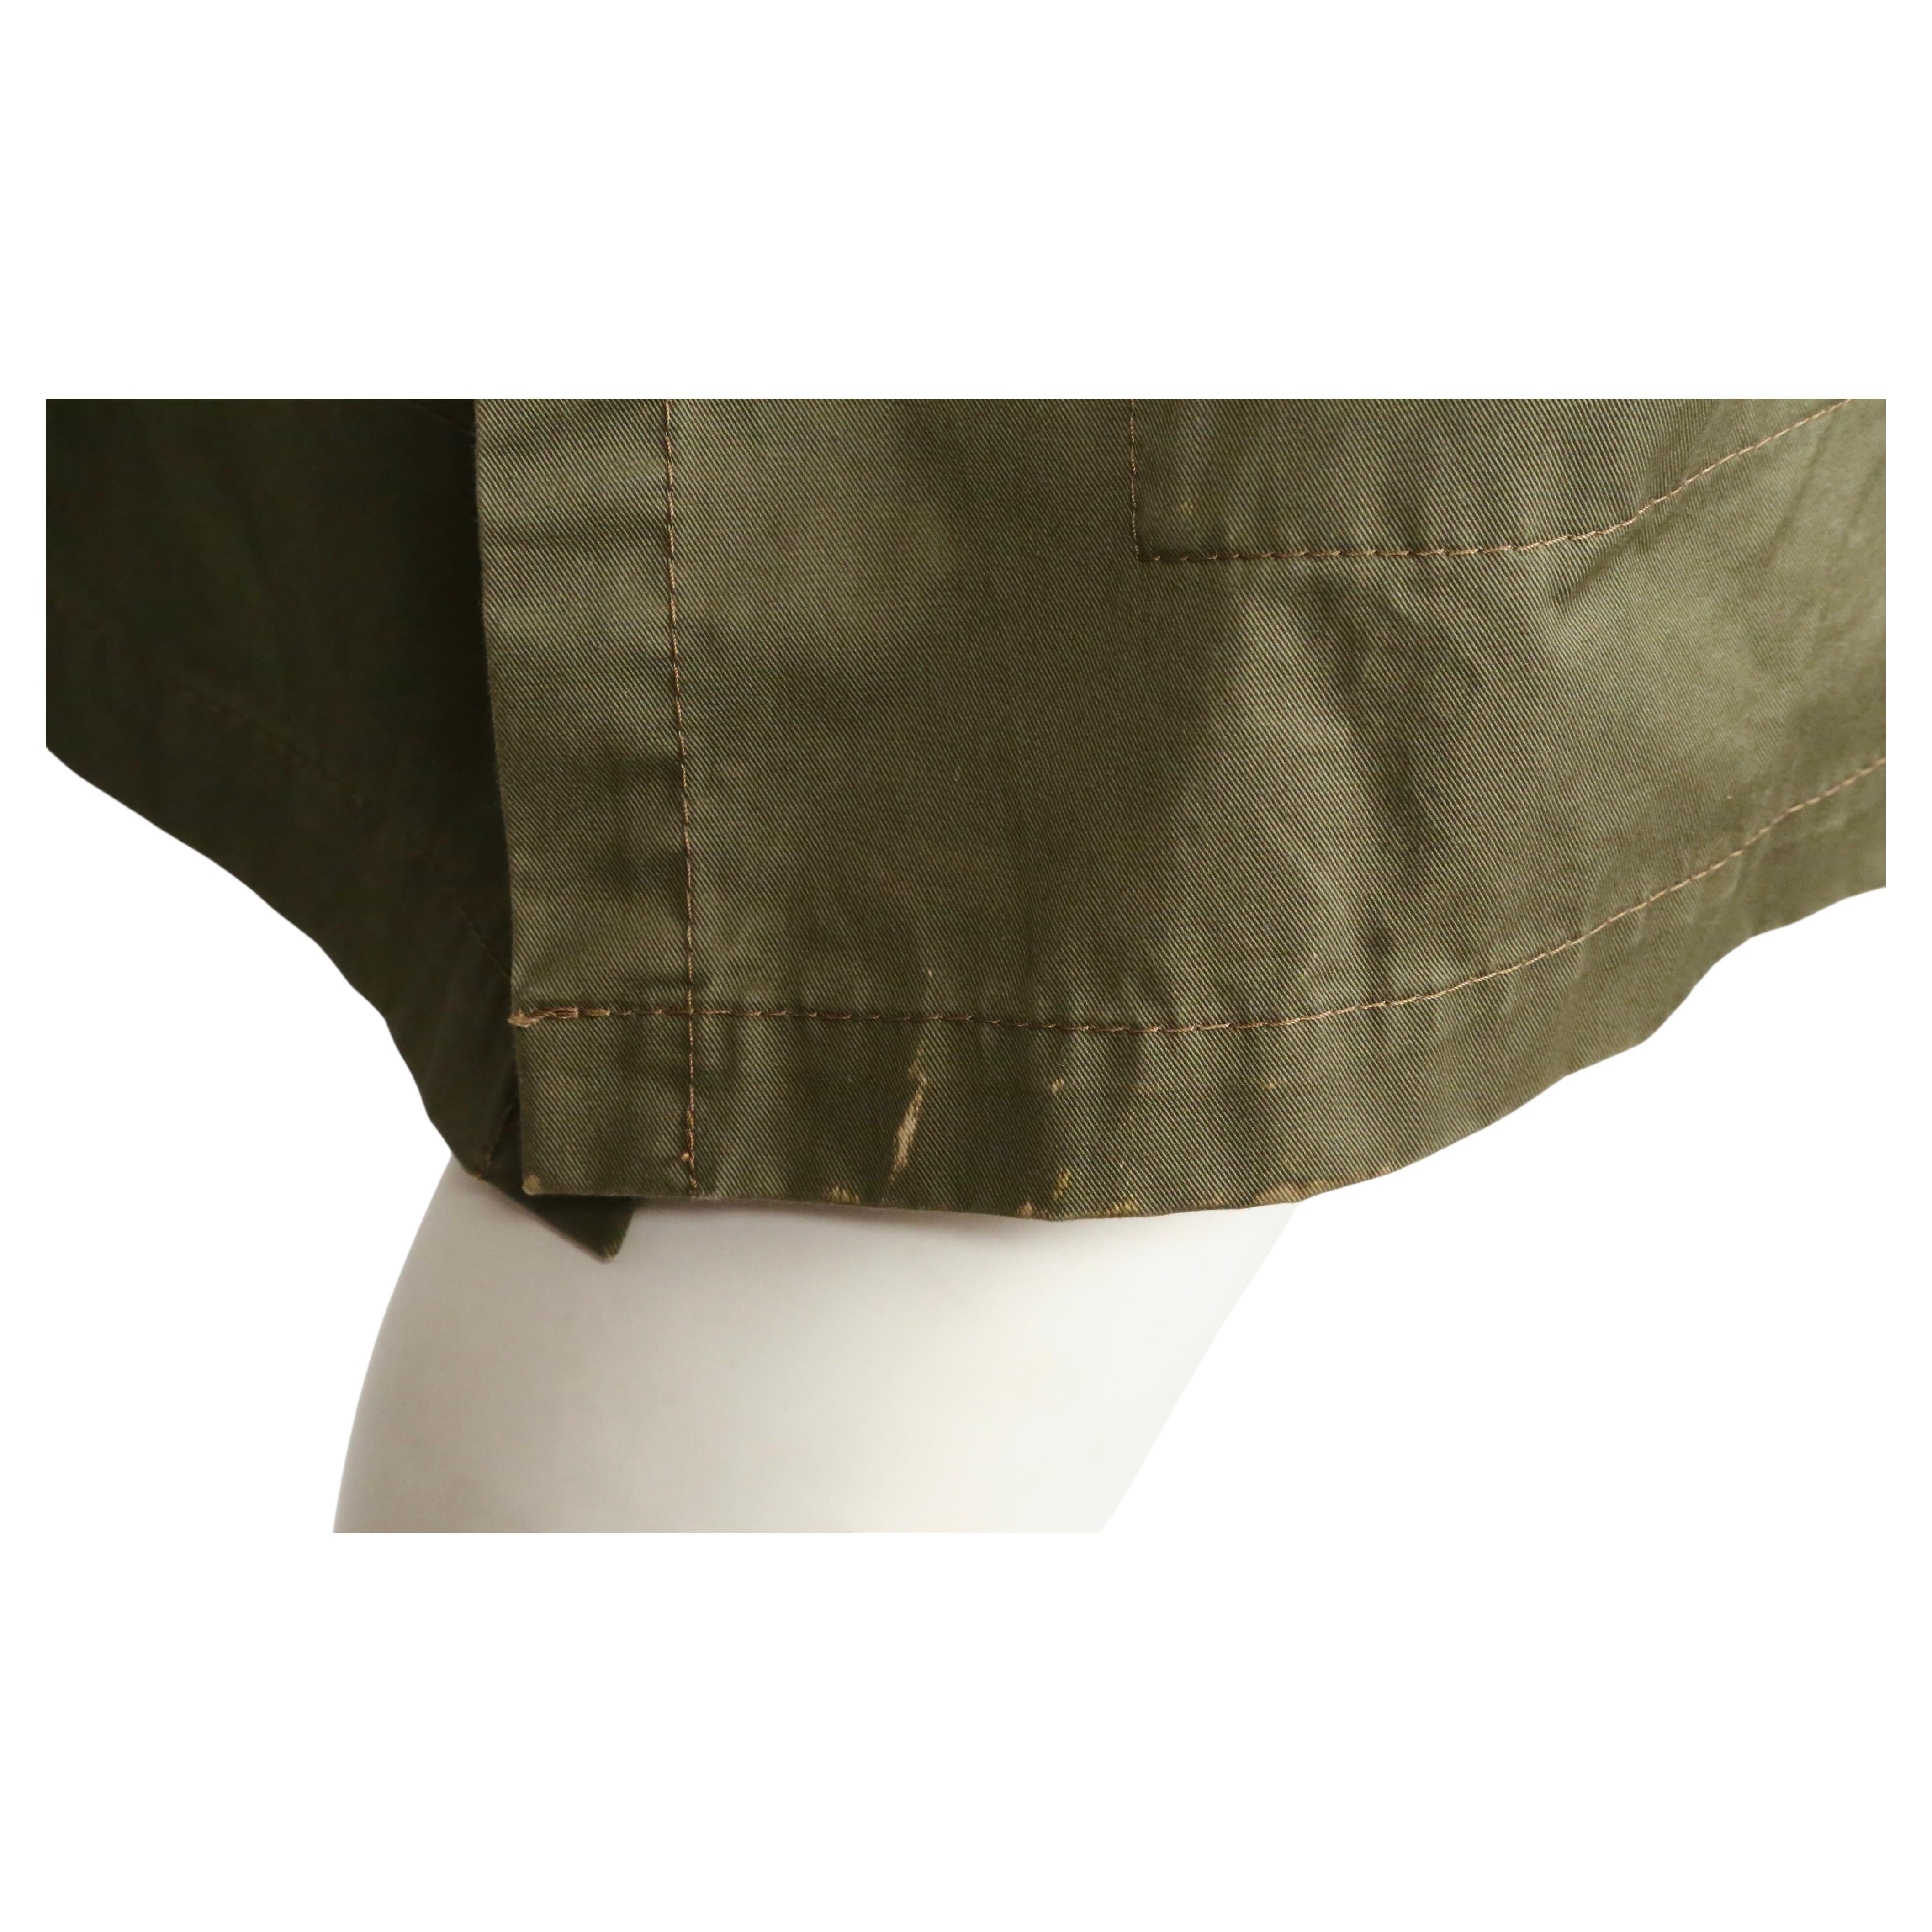 2009 COMME DES GARCONS army green cotton draped runway coat 3